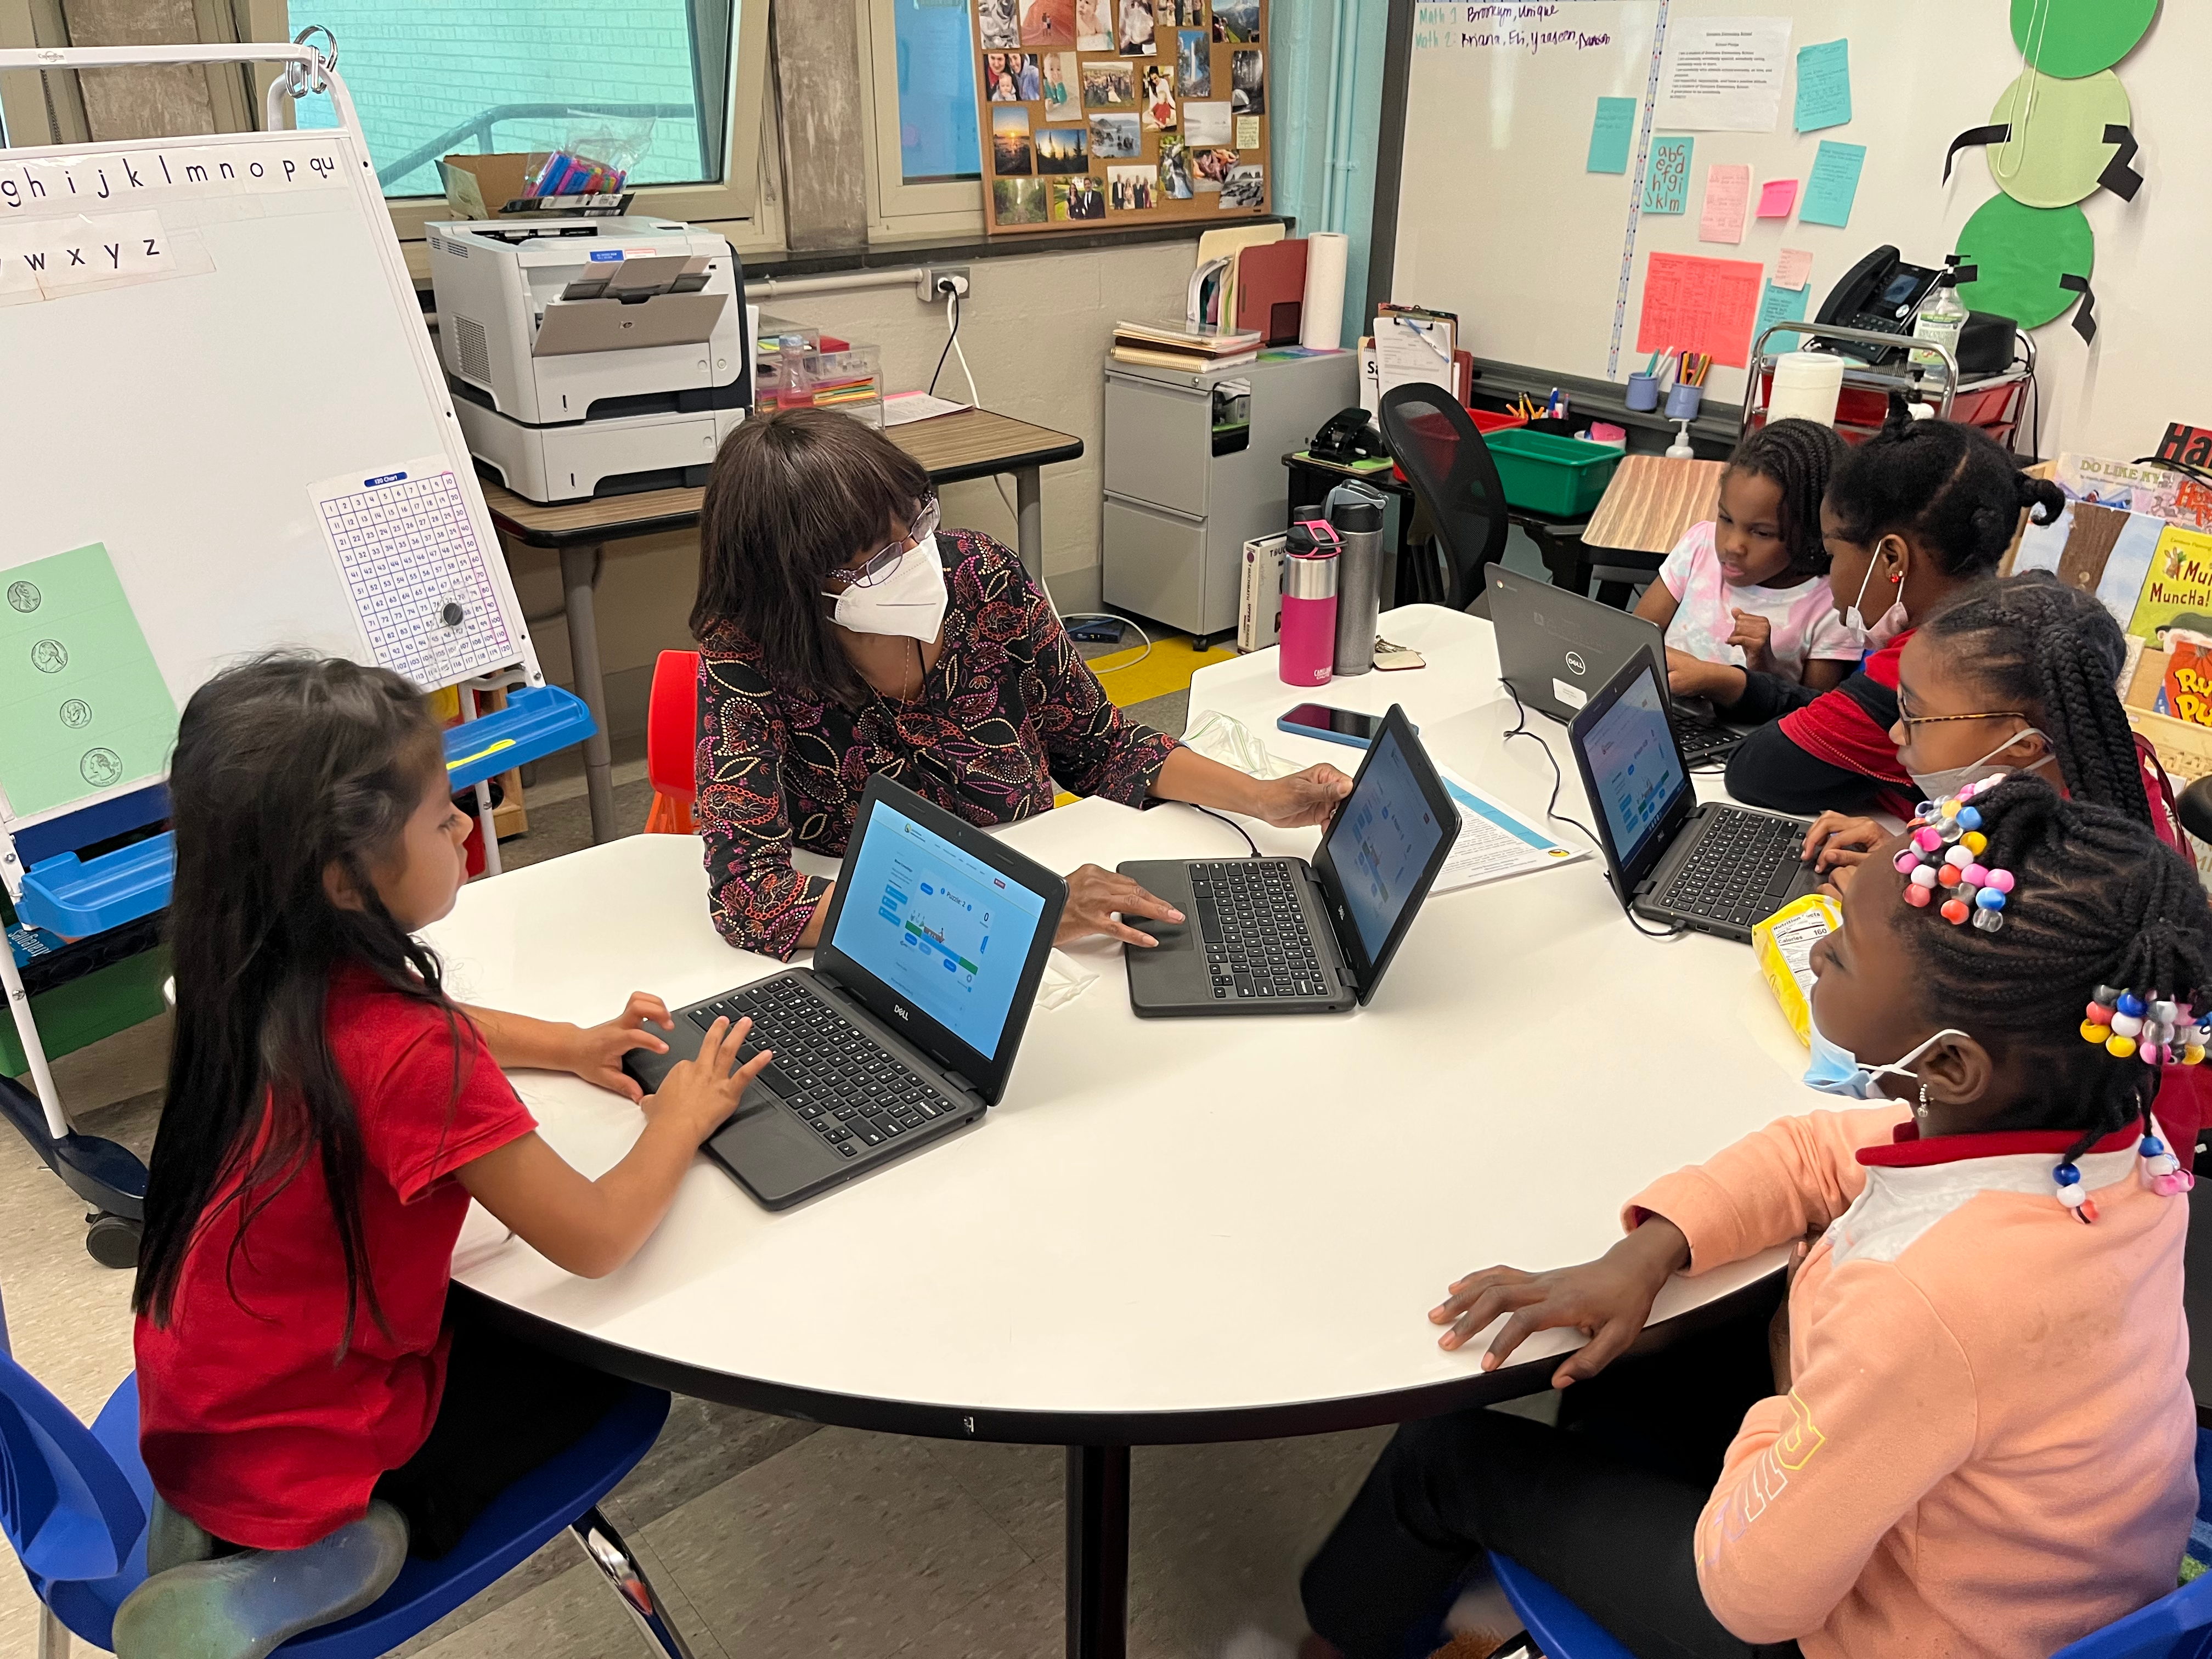 A group of students and a teacher play a math game on their laptops